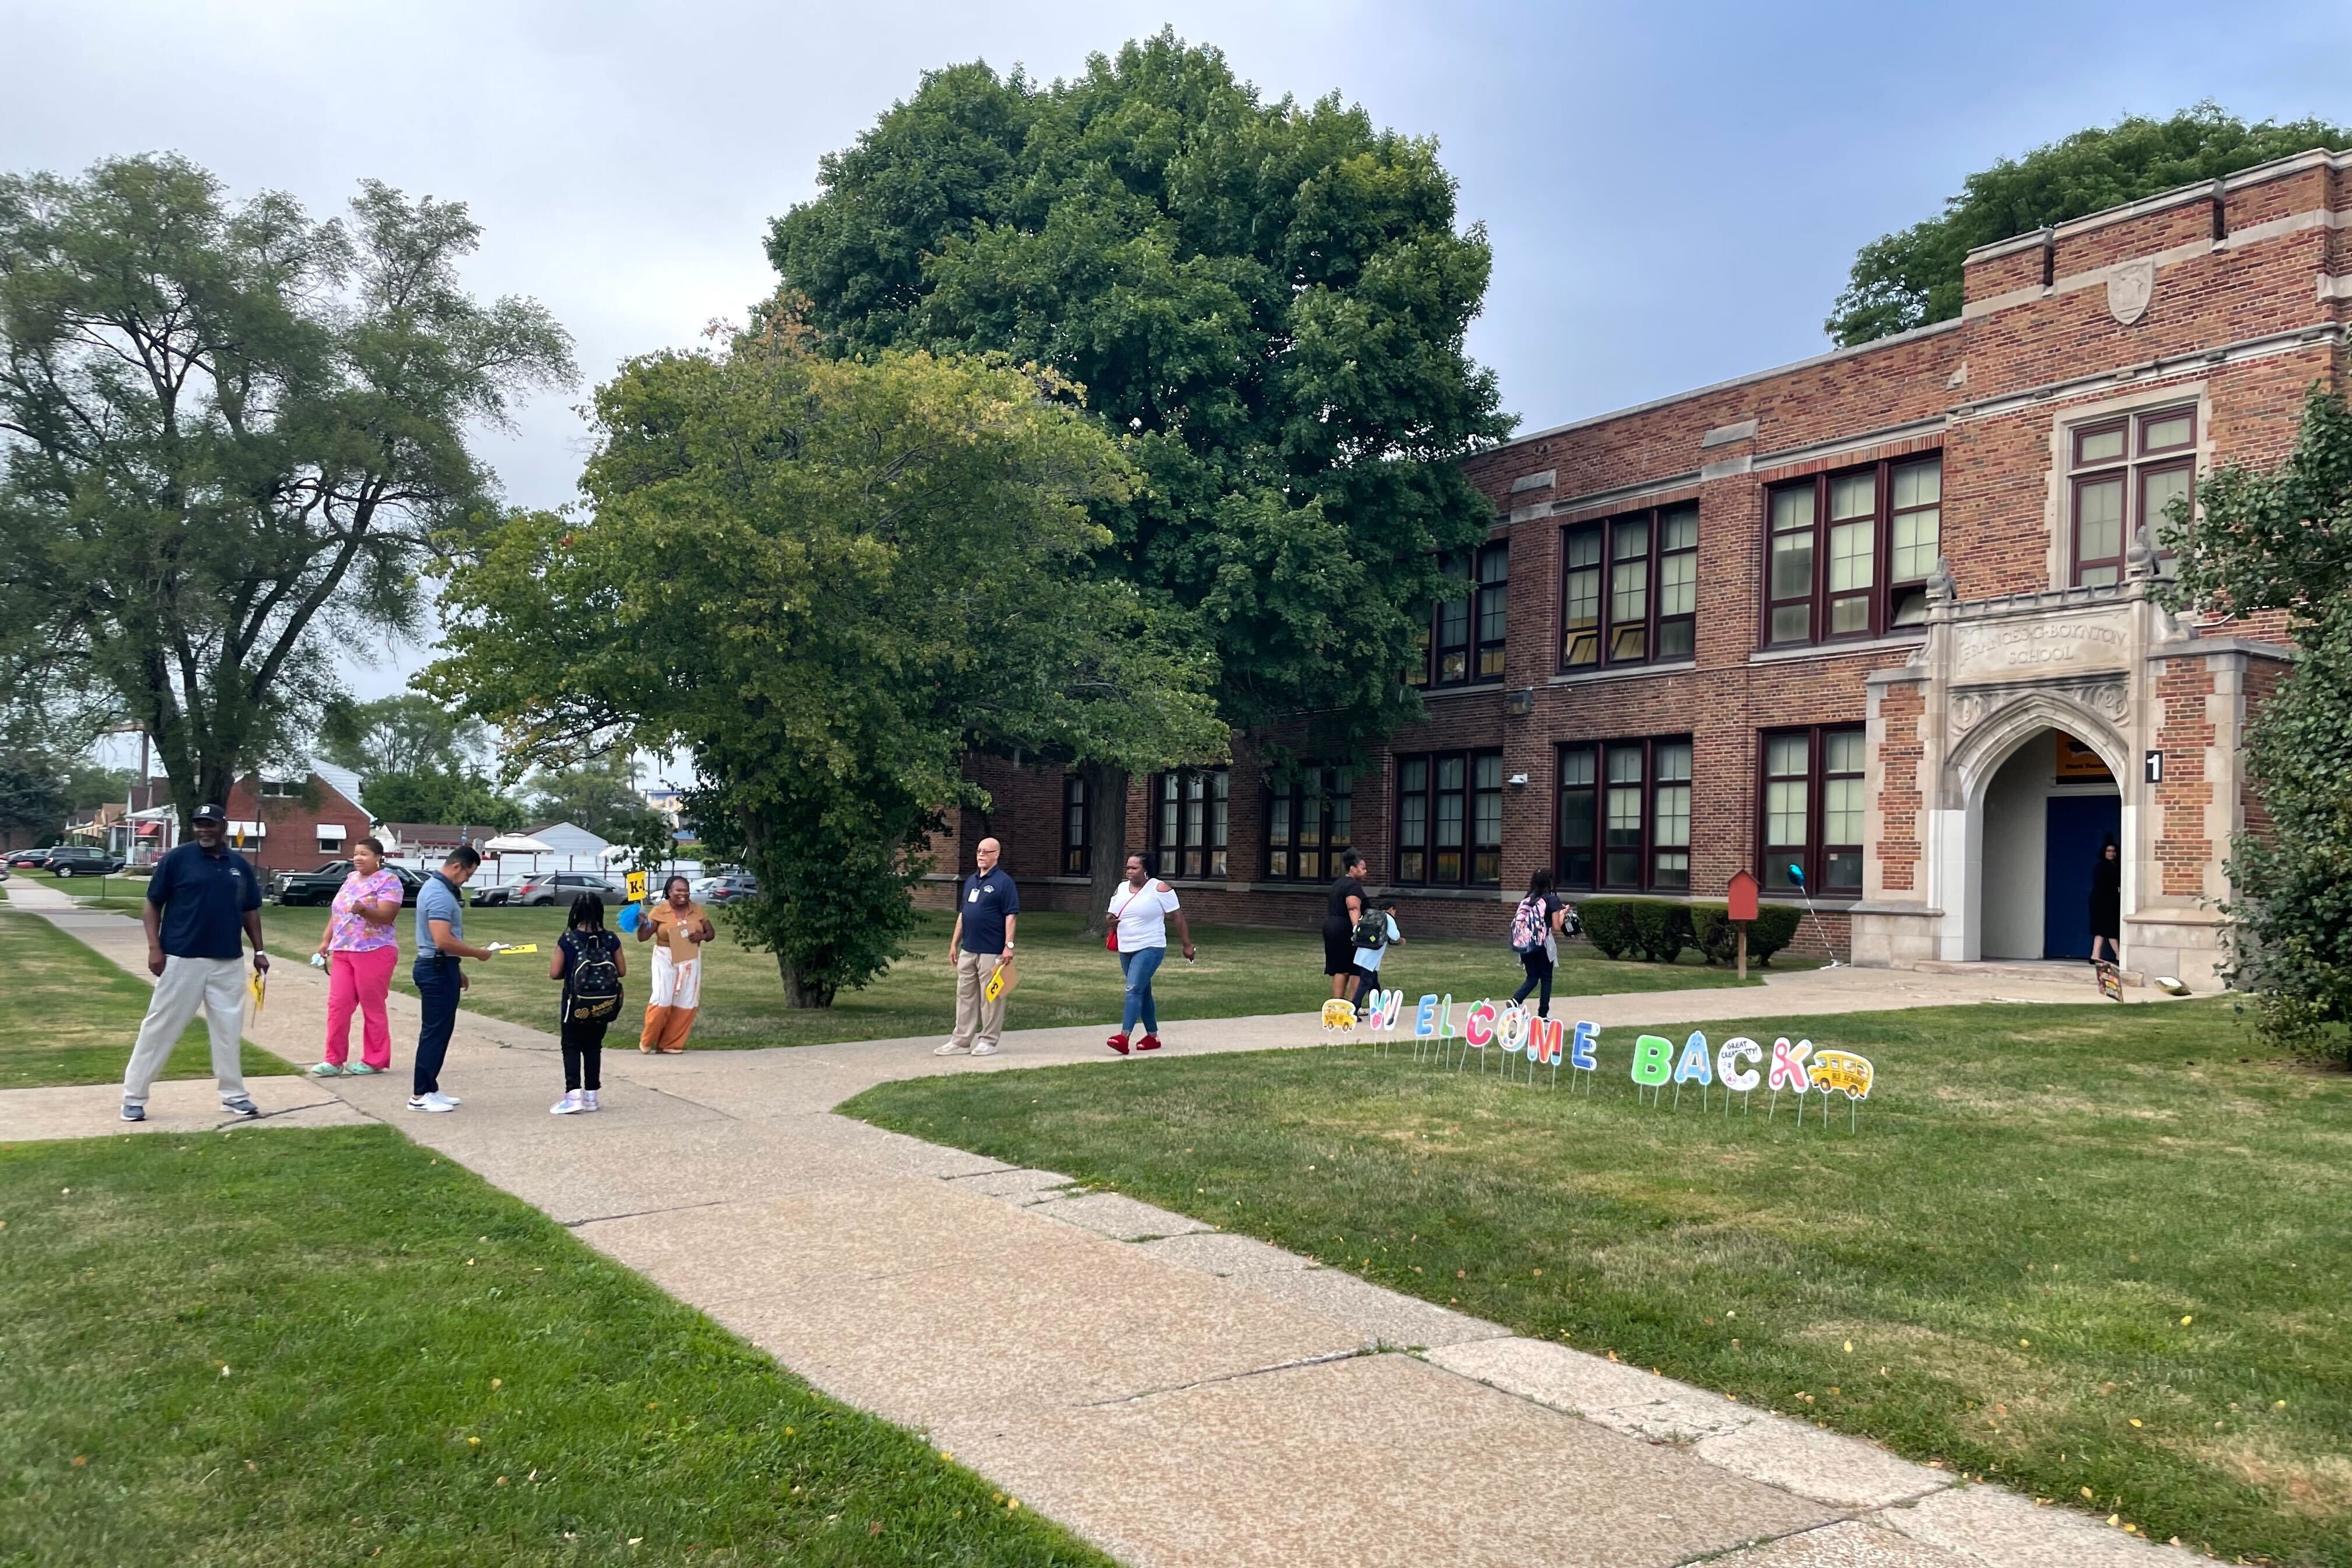 A school building is shown as parents walk their children to school on the first day in the Detroit school district. A welcome back sign is displayed in the lawn.